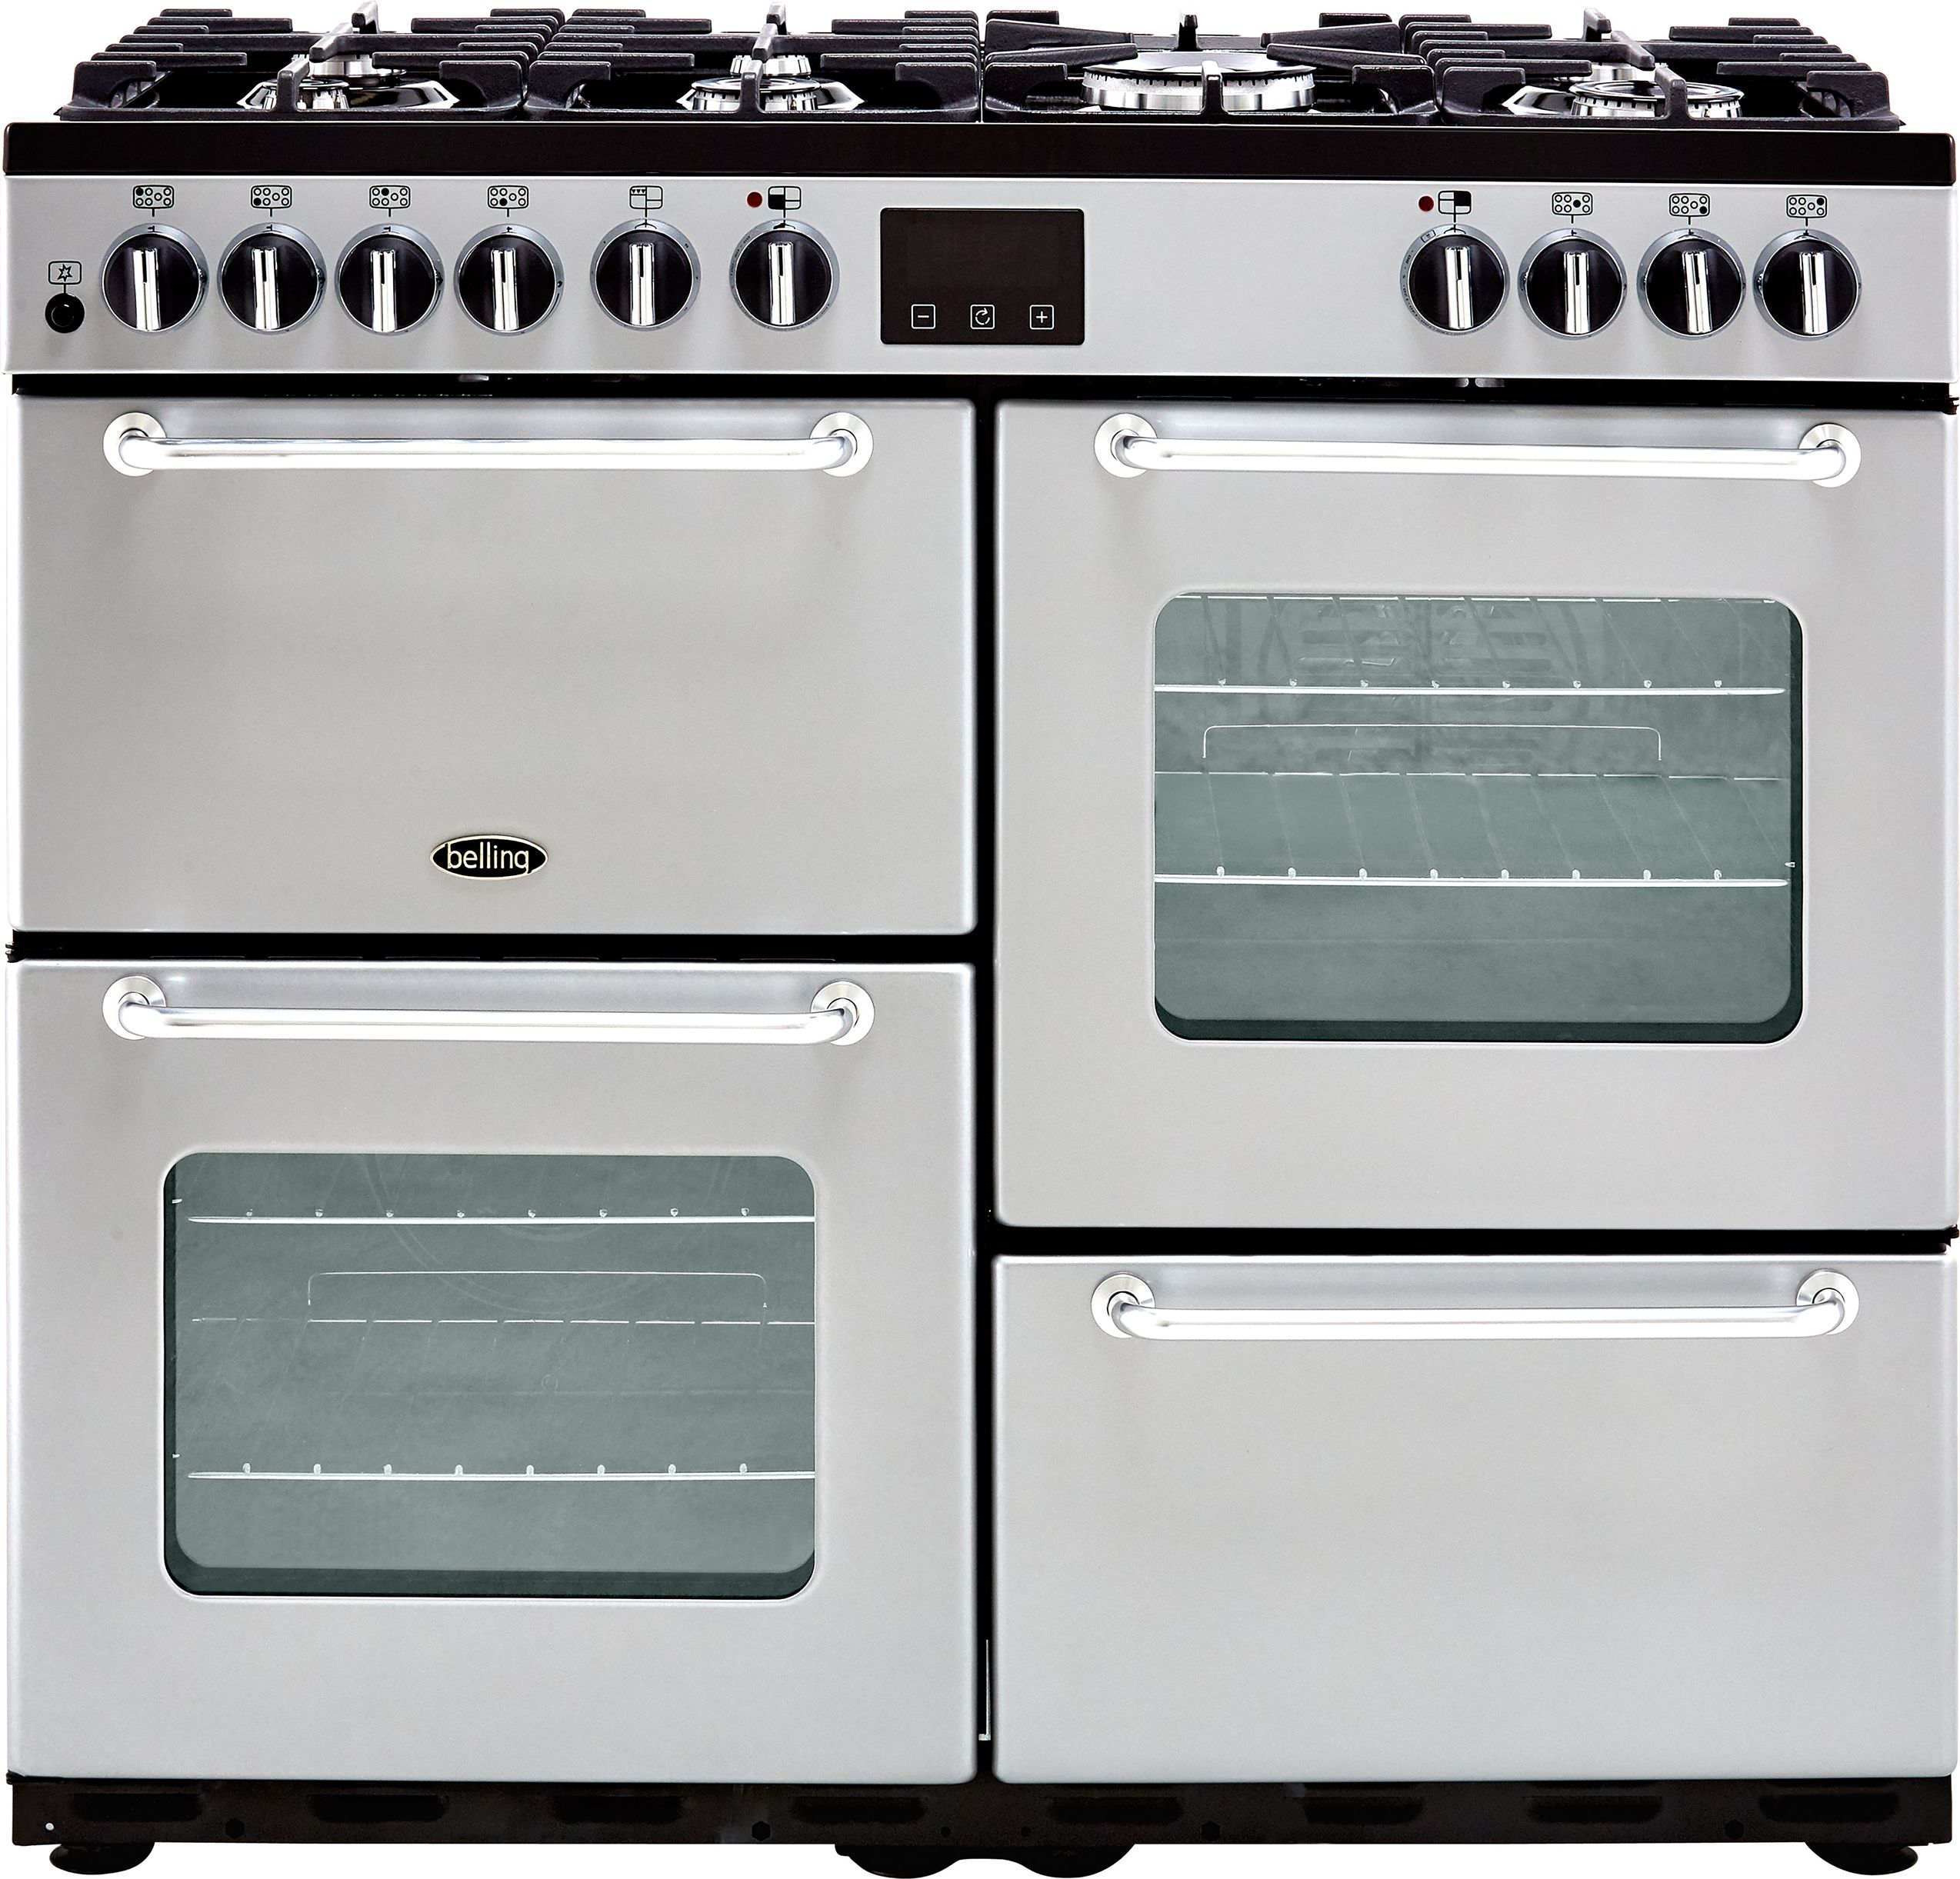 Belling SANDRINGHAM100DFT 100cm Dual Fuel Range Cooker - Silver - A/A Rated, Silver